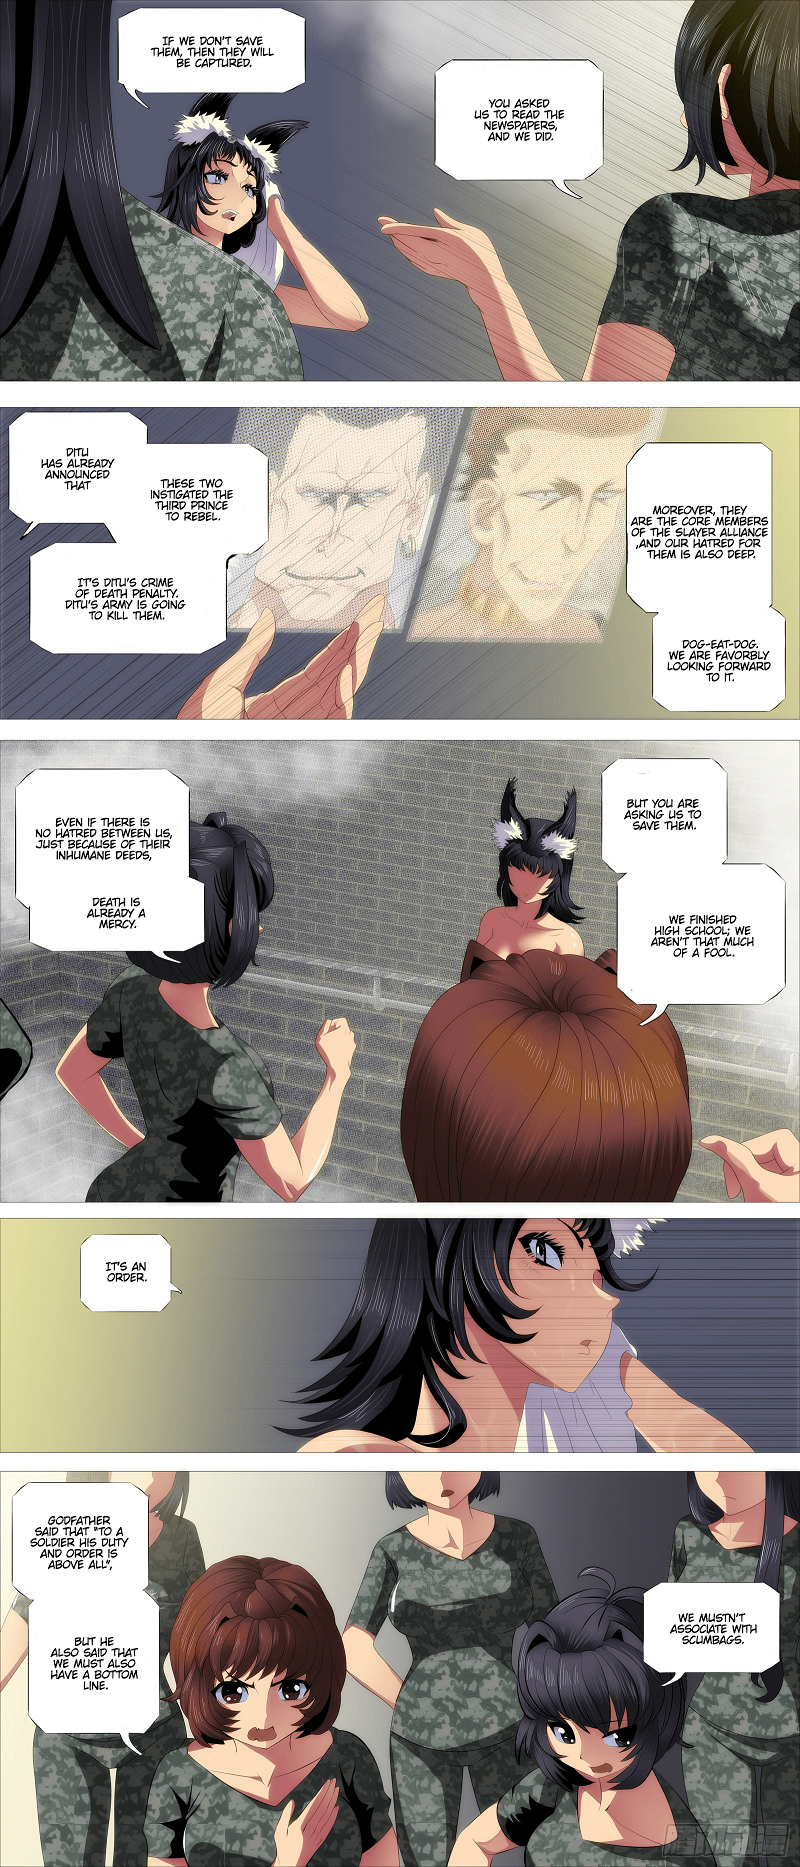 Iron Ladies Chapter 386 page 2